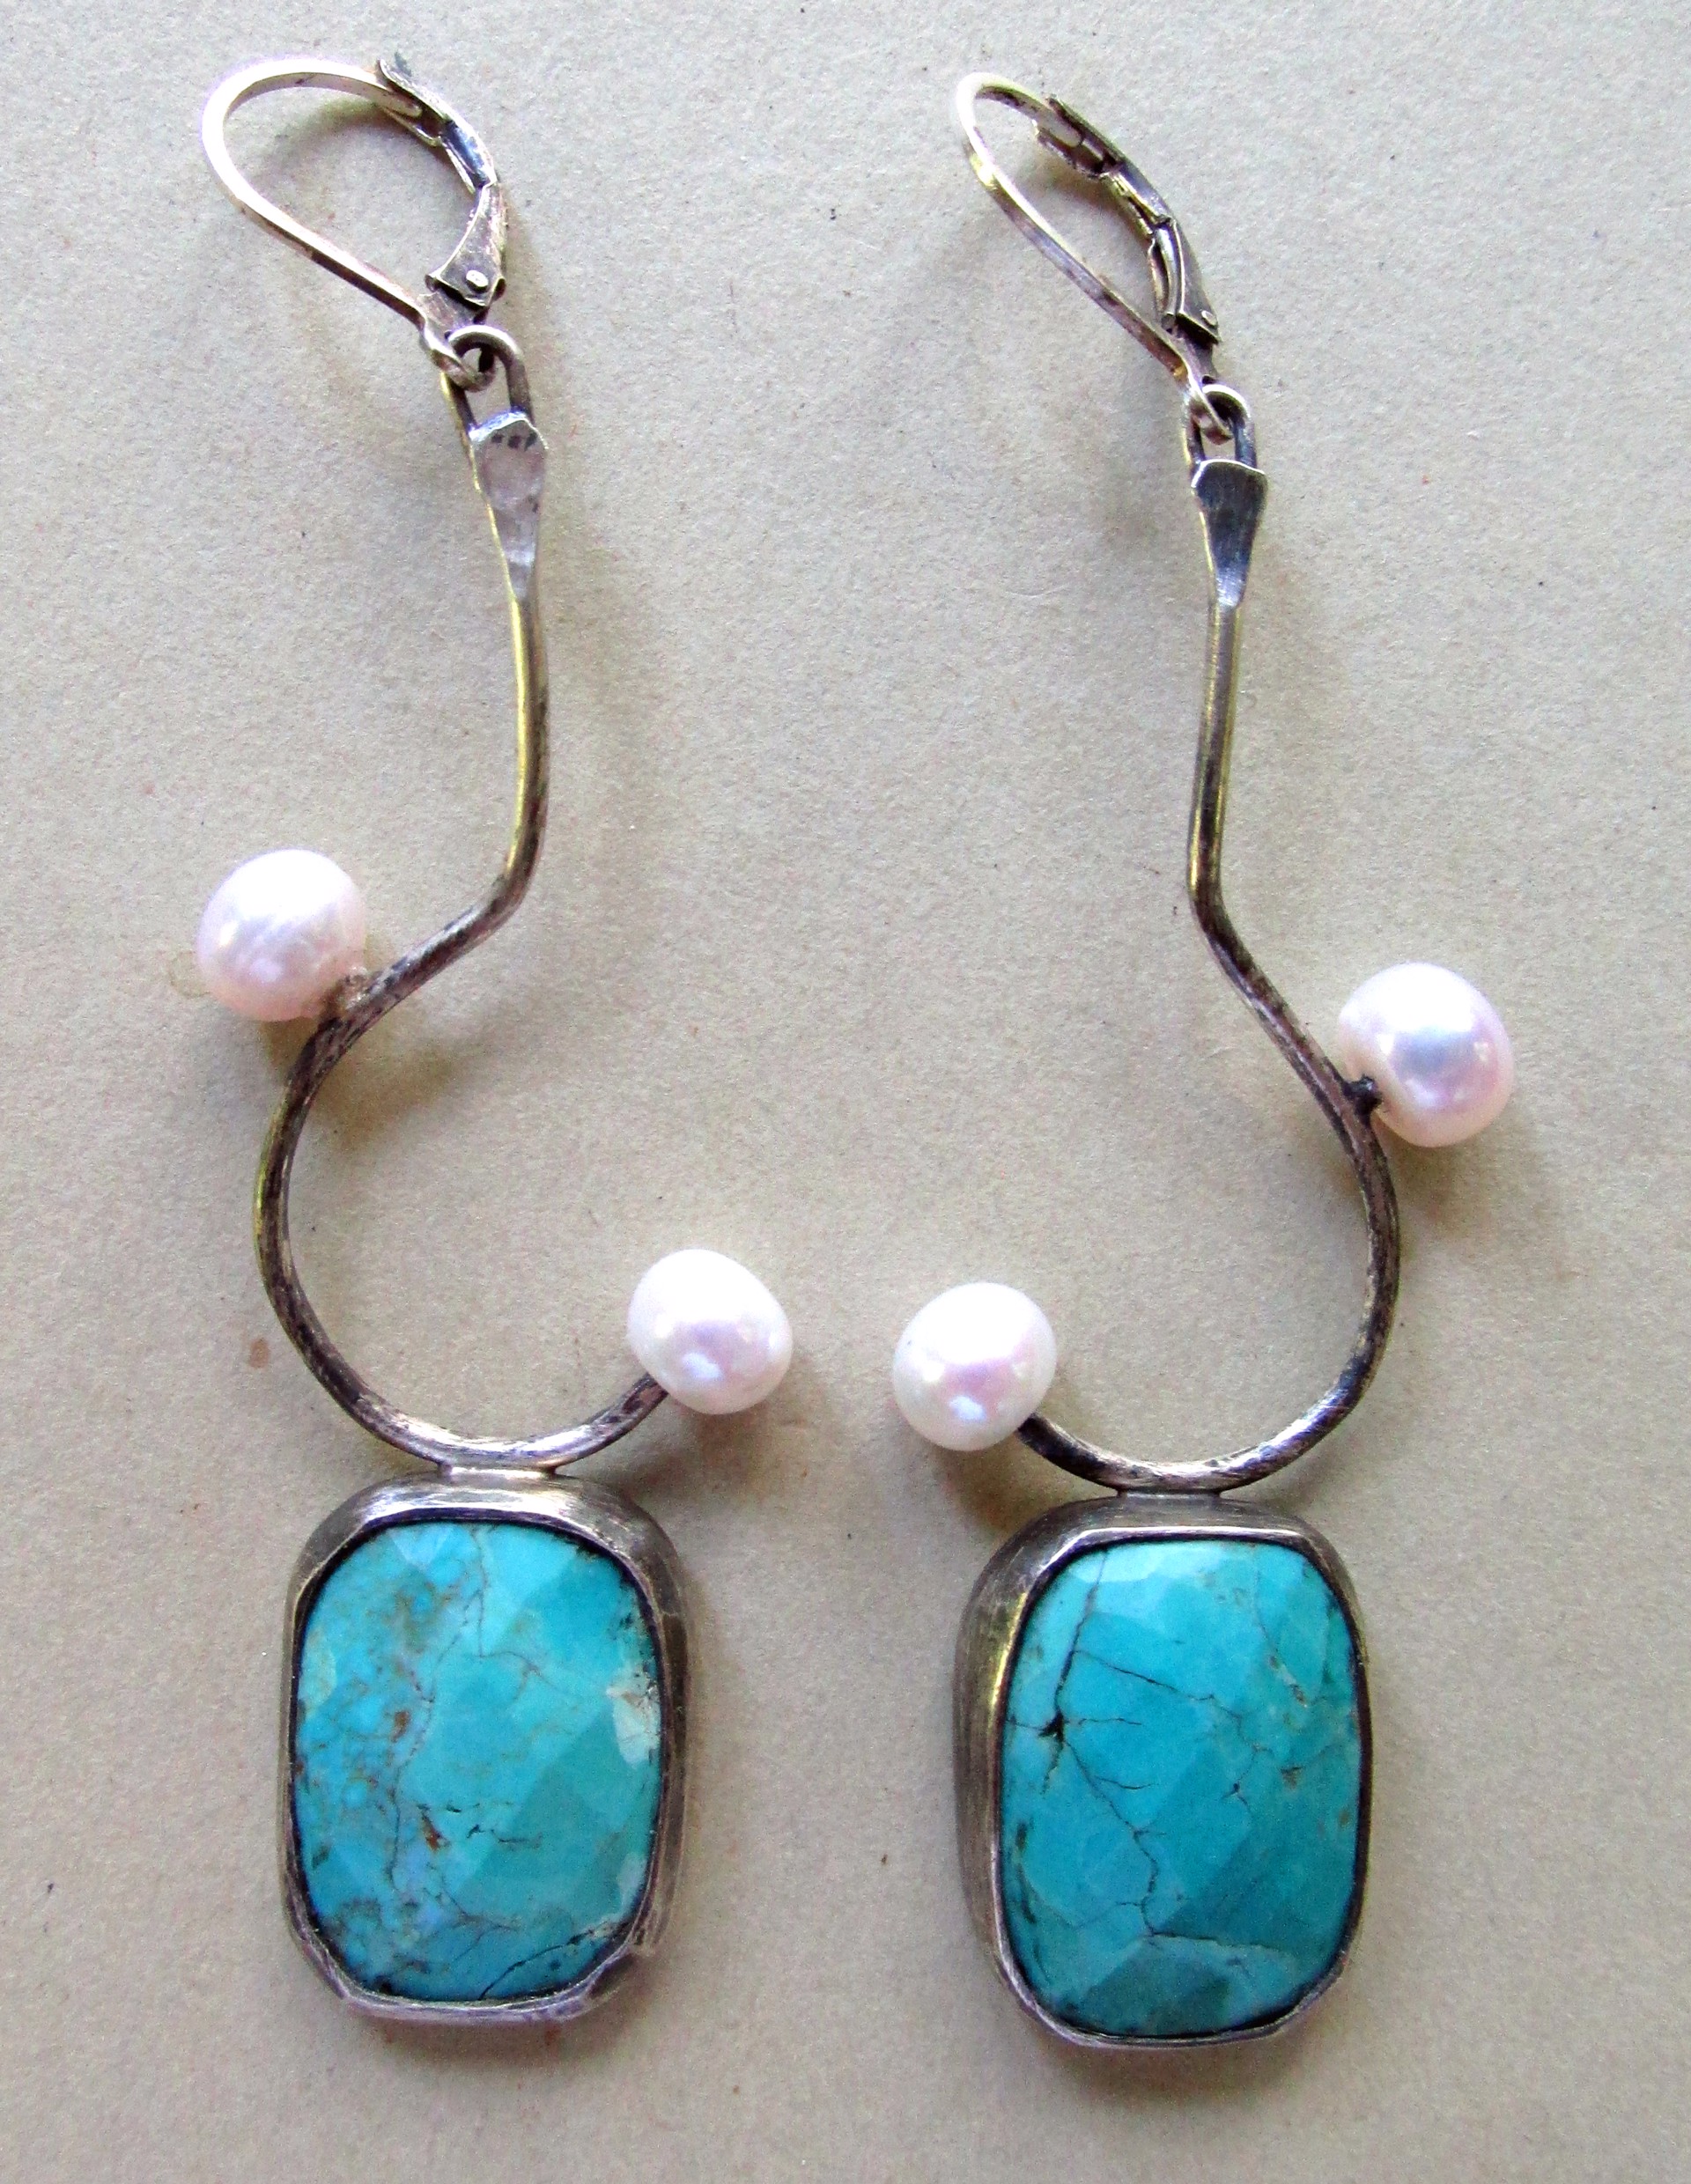 Faceted Turquoise, Pearls, and Sterling Silver Earrings by Anne Rob